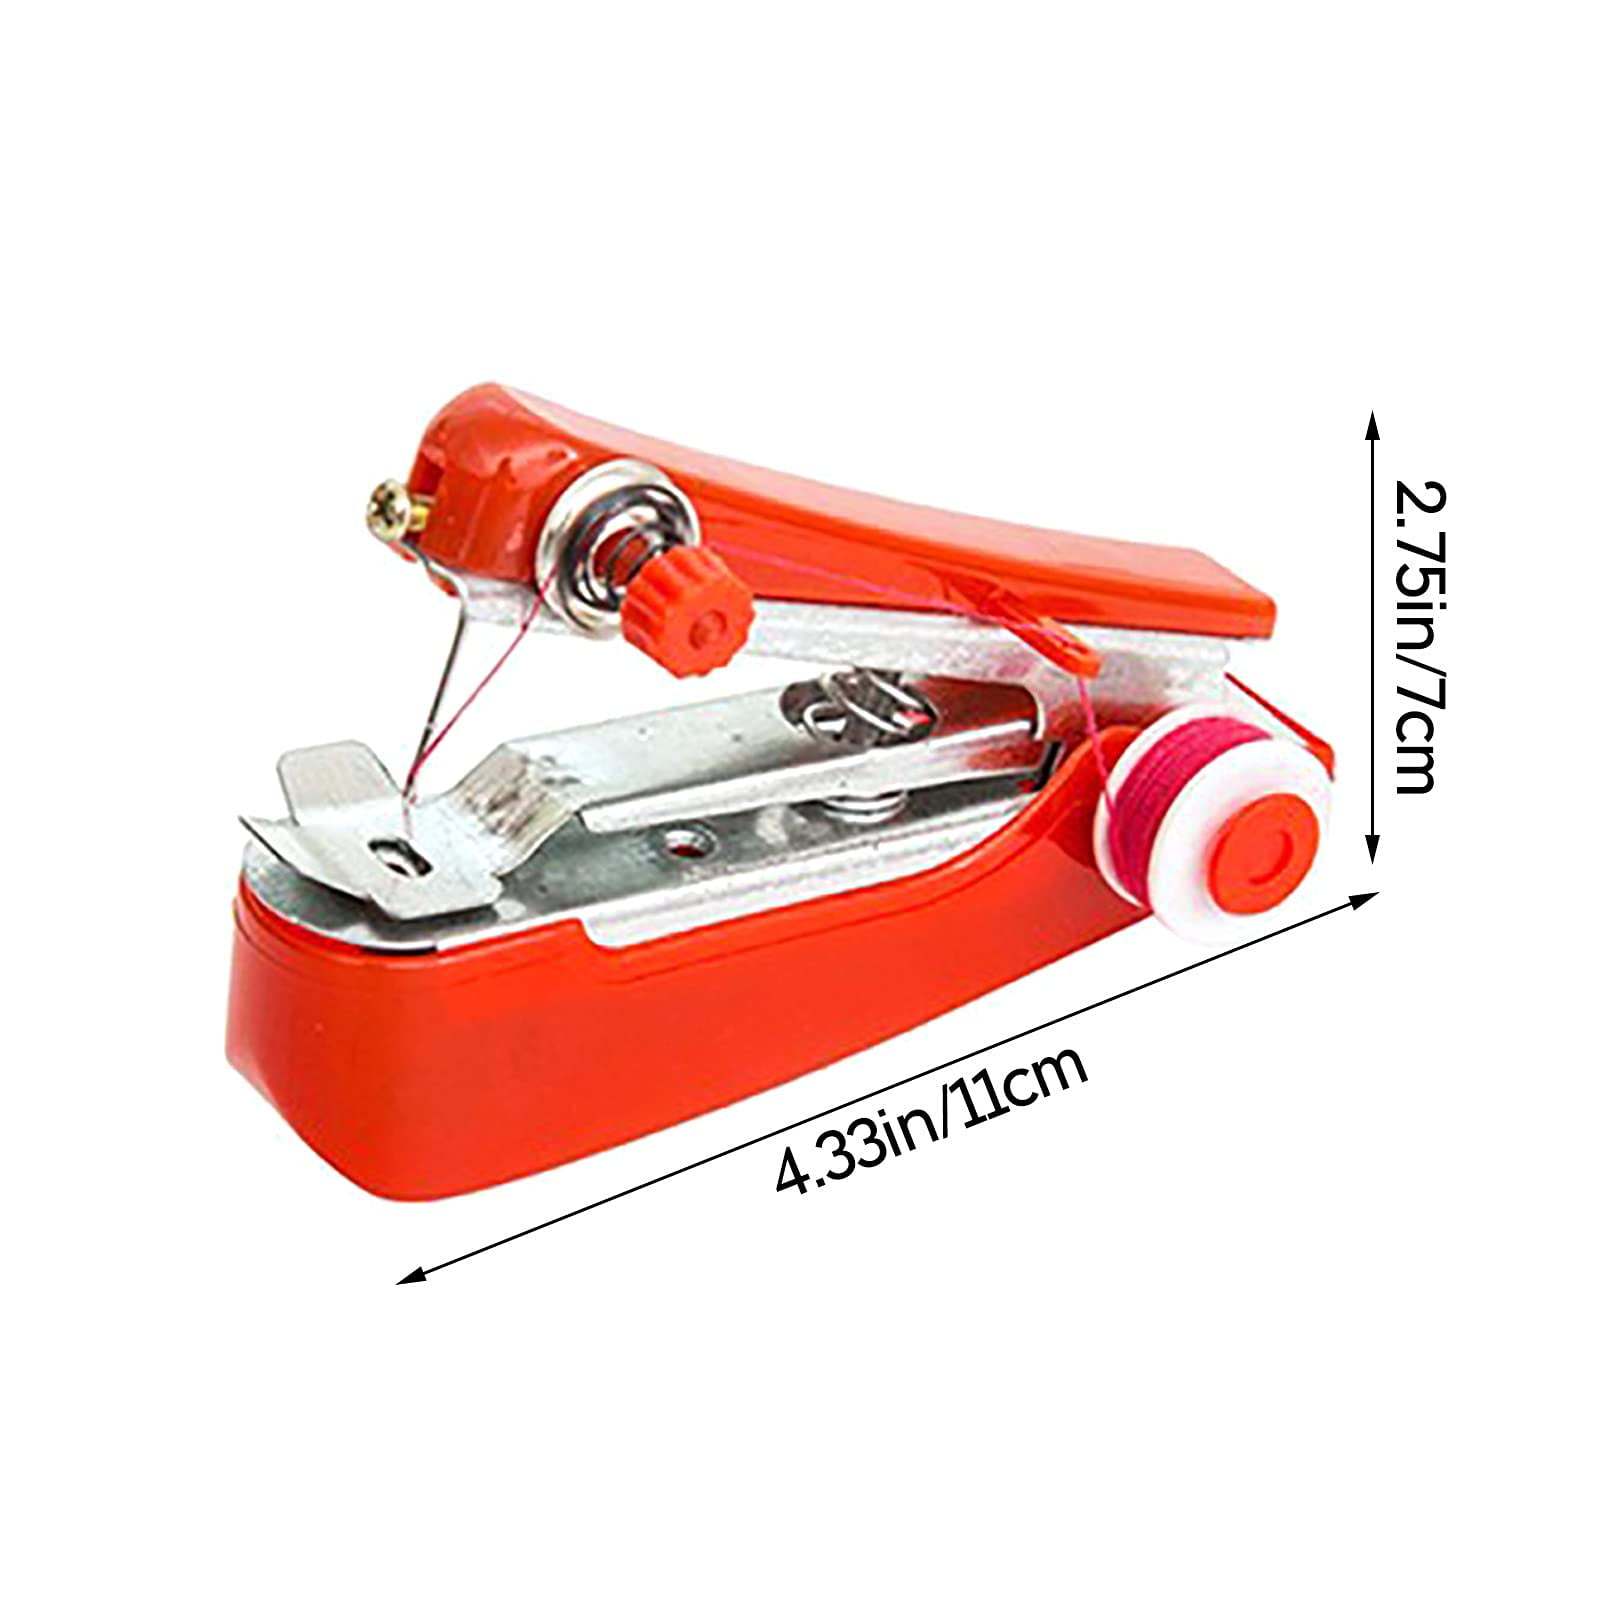 Mini Manual Stapler Style Hand Sewing Machine for Craft Clothes